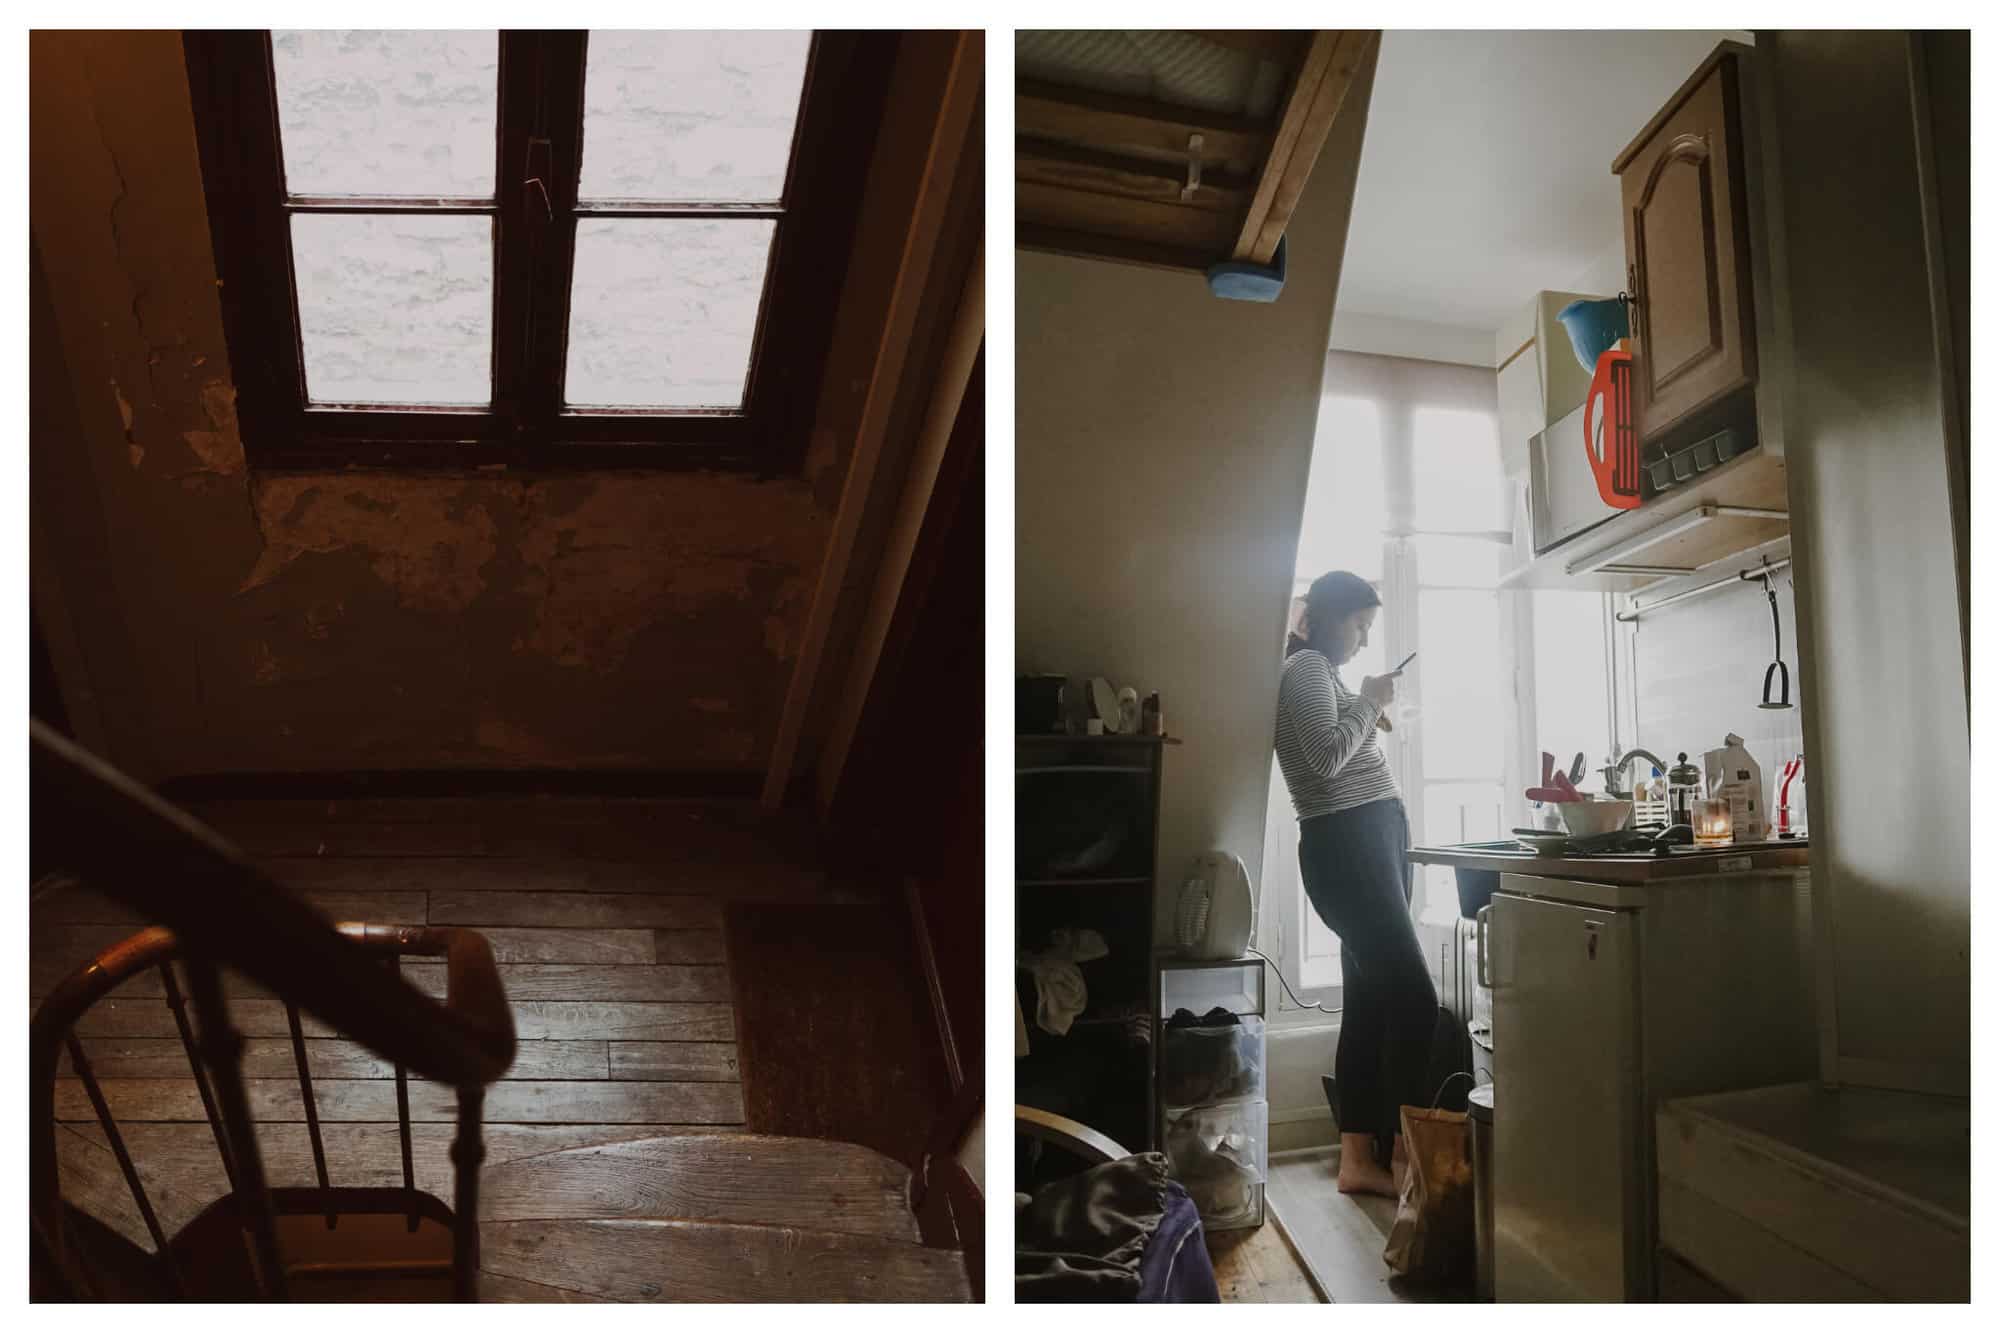 Left: A wooden, Parisian staircase that leads to the Chambre de Bonne apartments. Right: The author is standing beside her kitchen sink, texting on her phone, inside her chambre de bonne.